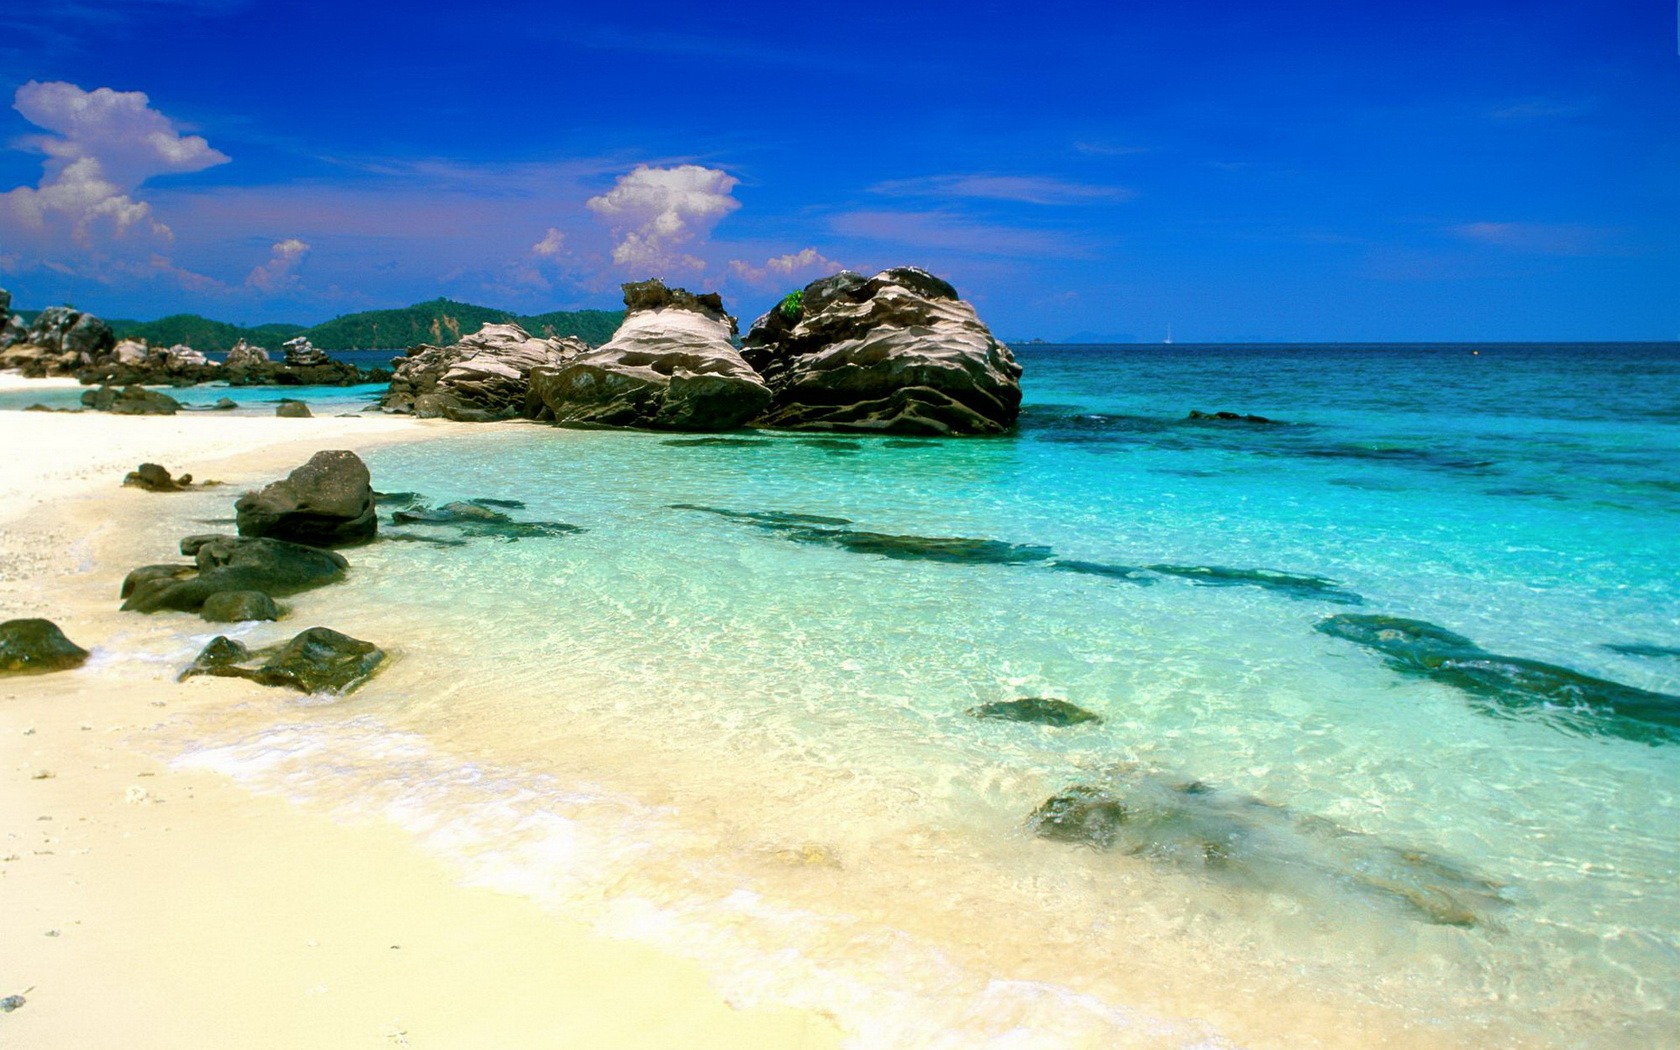 Thailand's natural beauty wallpapers #3 - 1680x1050